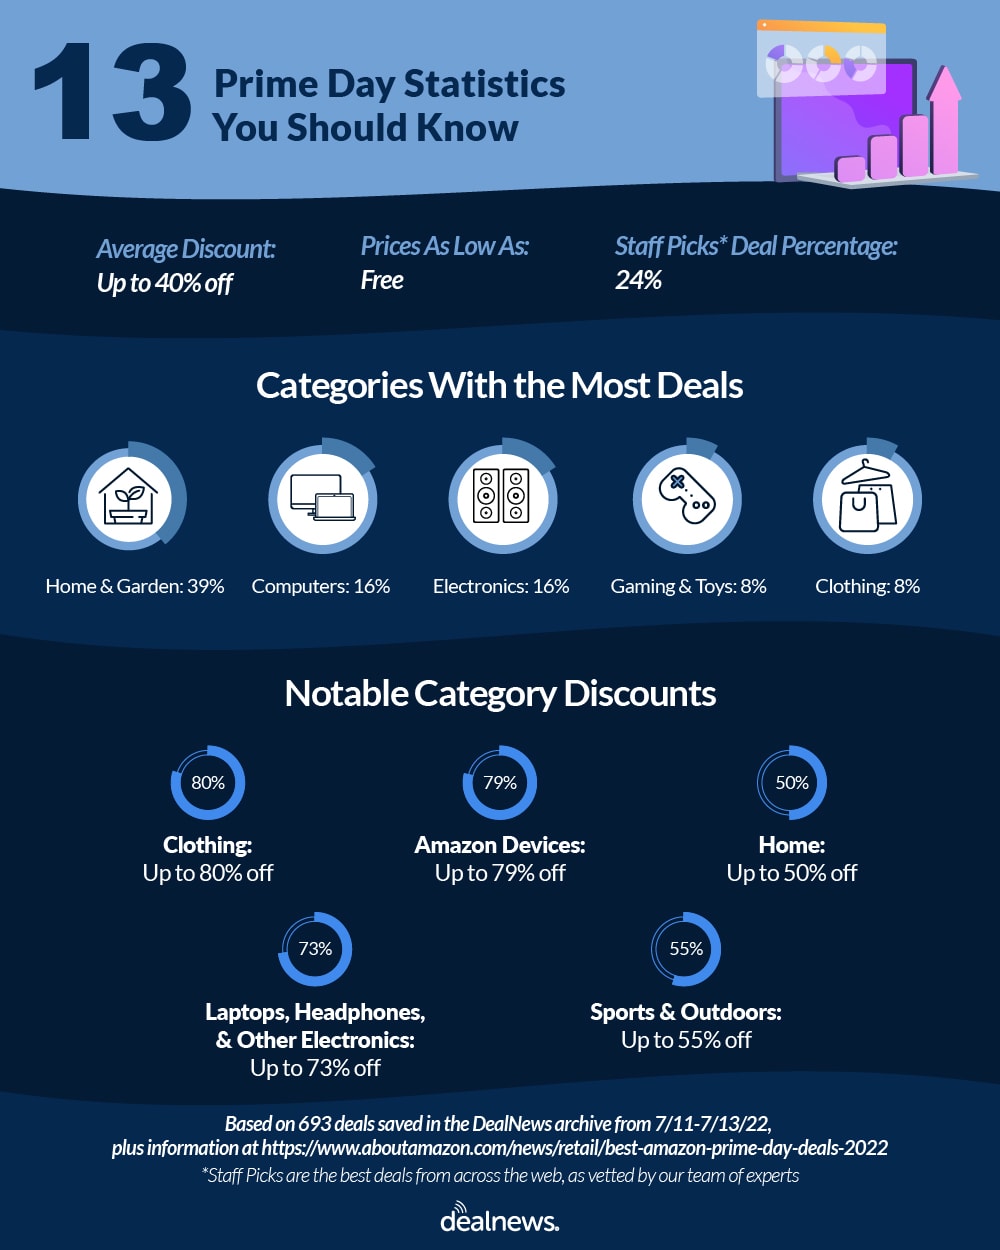 Thirteen statistics from Prime Day 2022 shown in infographic.